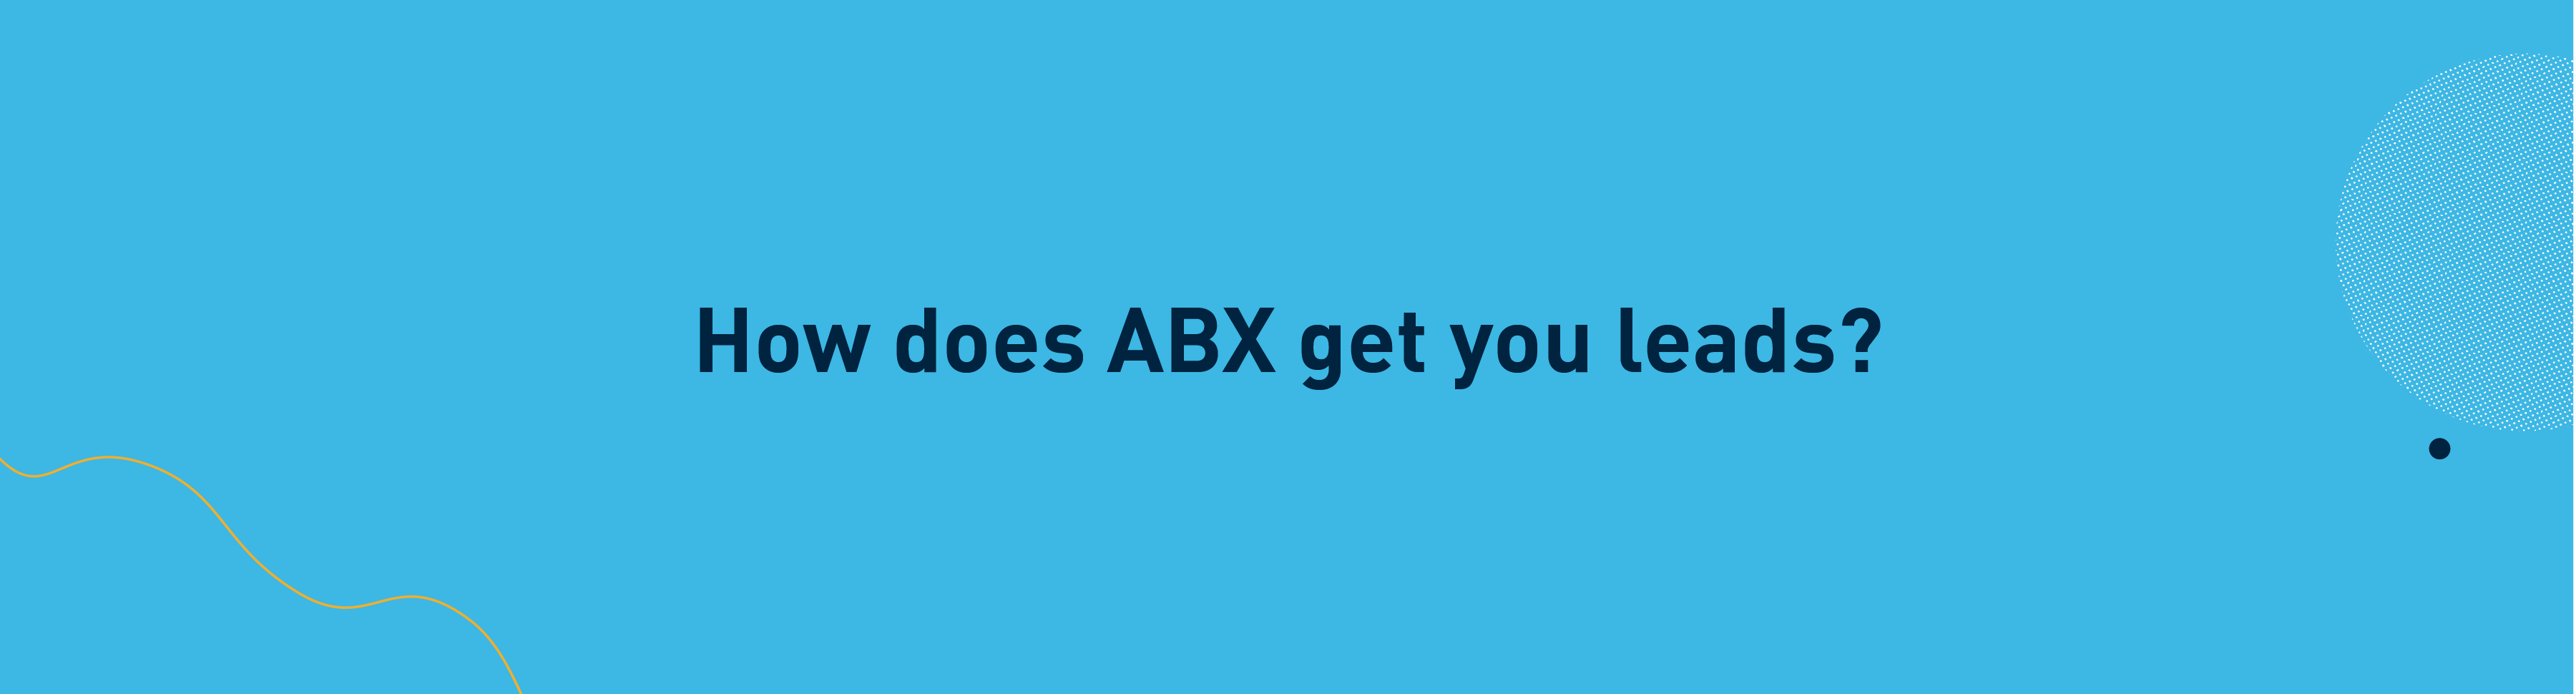 How does ABX get you leads?